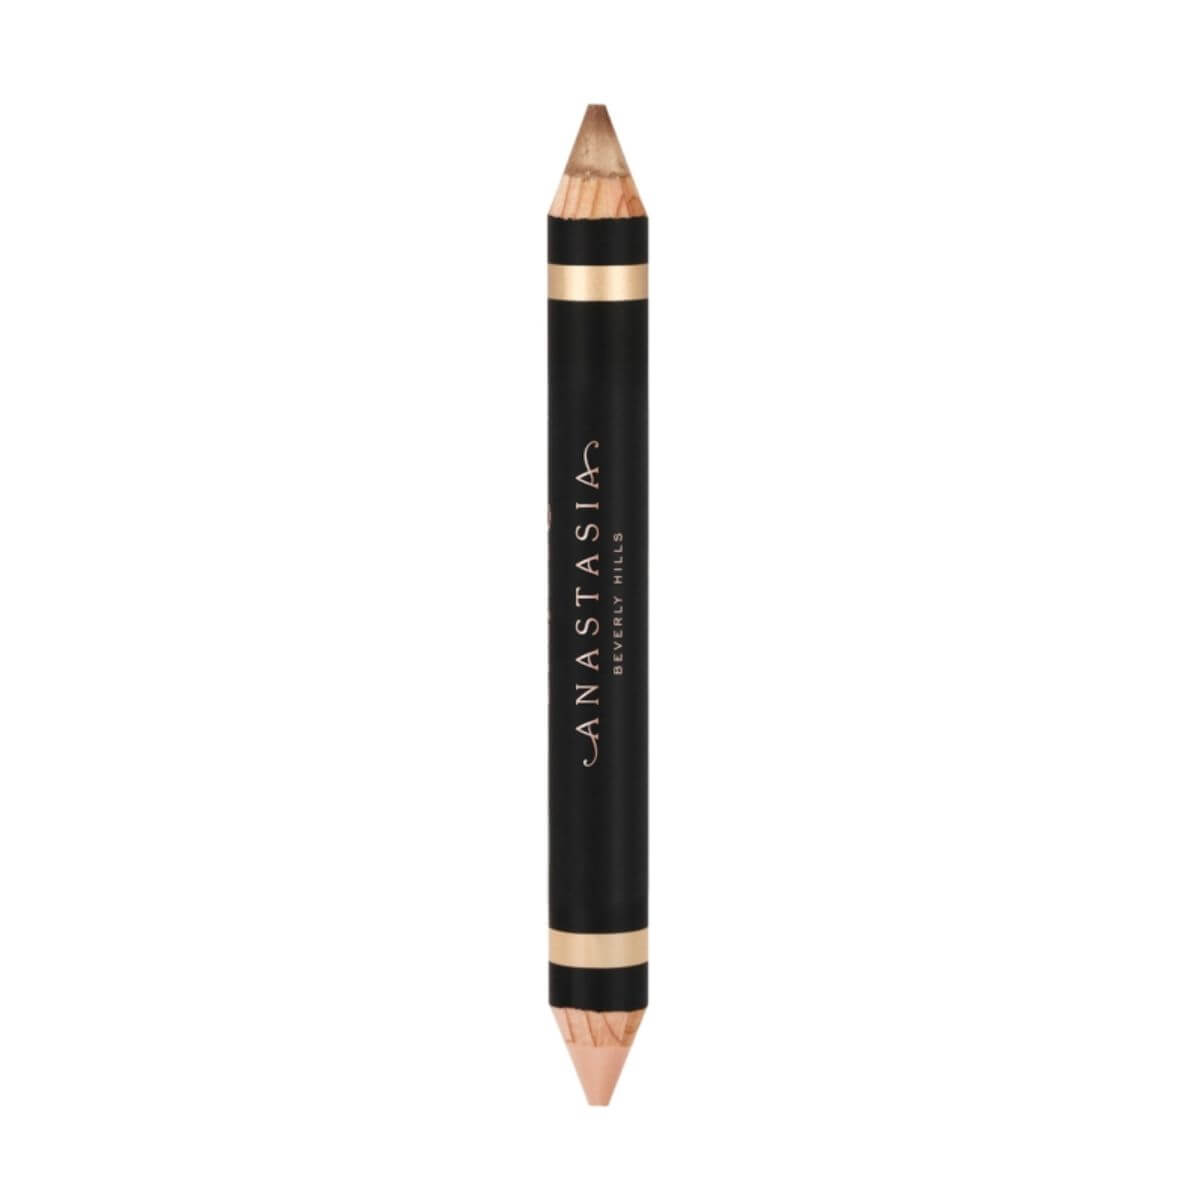 Highlighting Duo Pencil - Shell/Lace